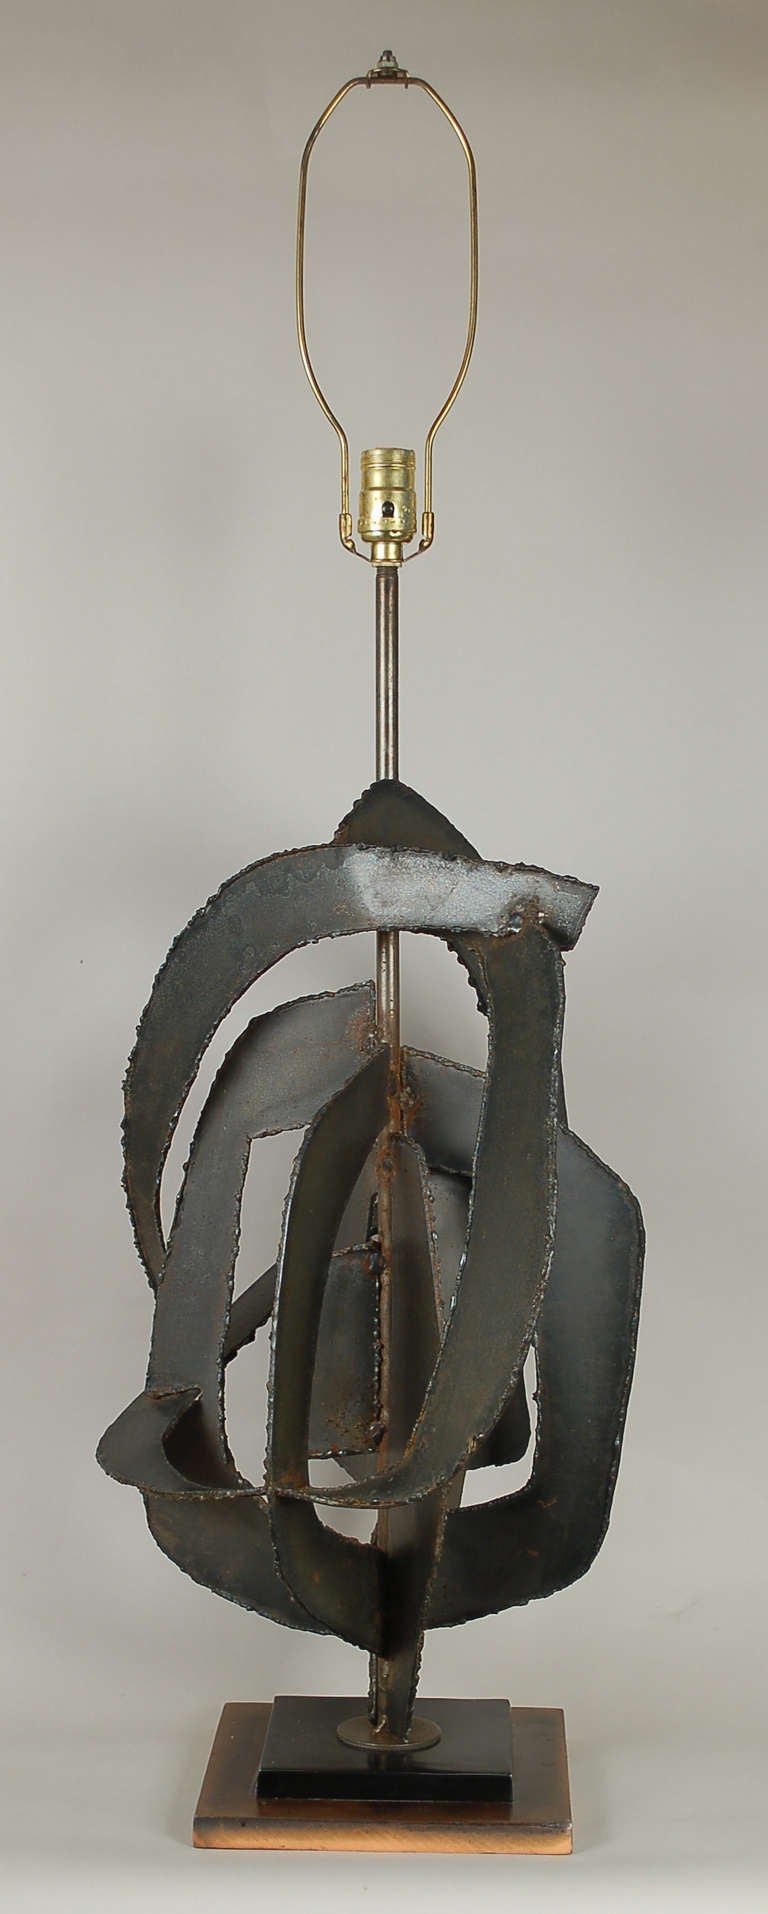 Torch cut and welded steel lamp by Harry Balmer for Flemington Iron Works. 